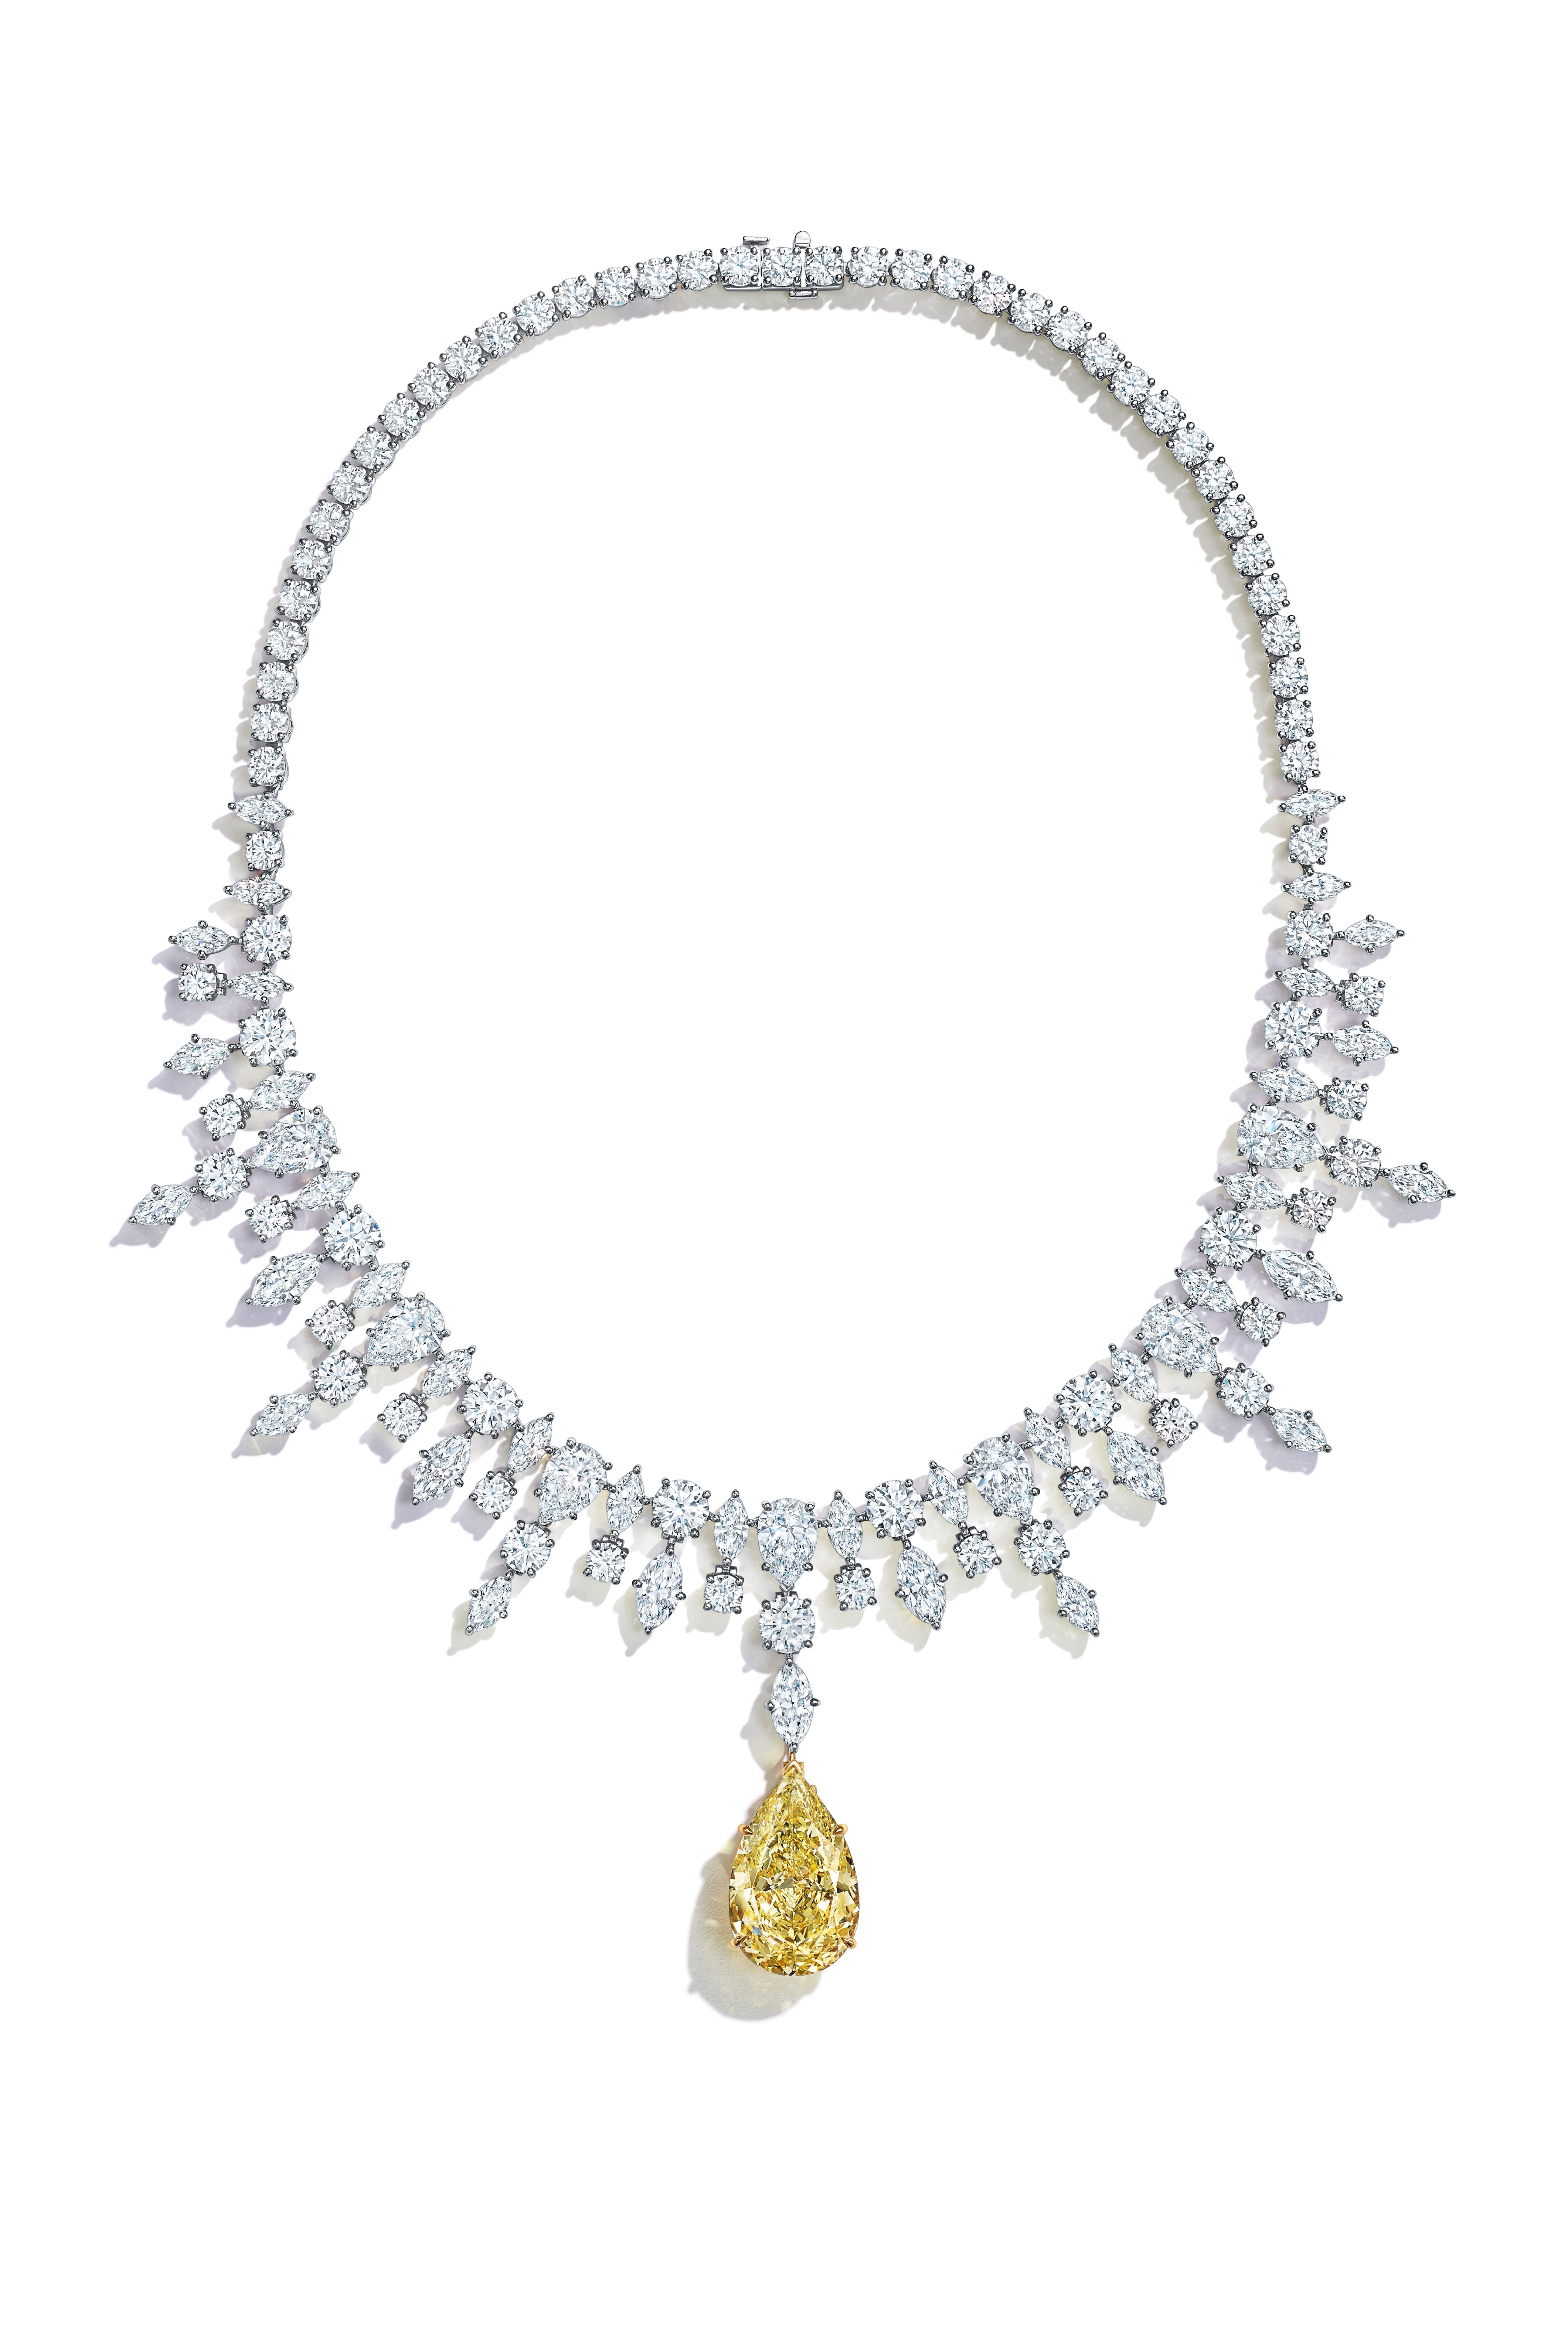 The Art of Craft: How This Lavish New Necklace From Tiffany & Co. Recalls  the Storied History of a World-Famous Diamond